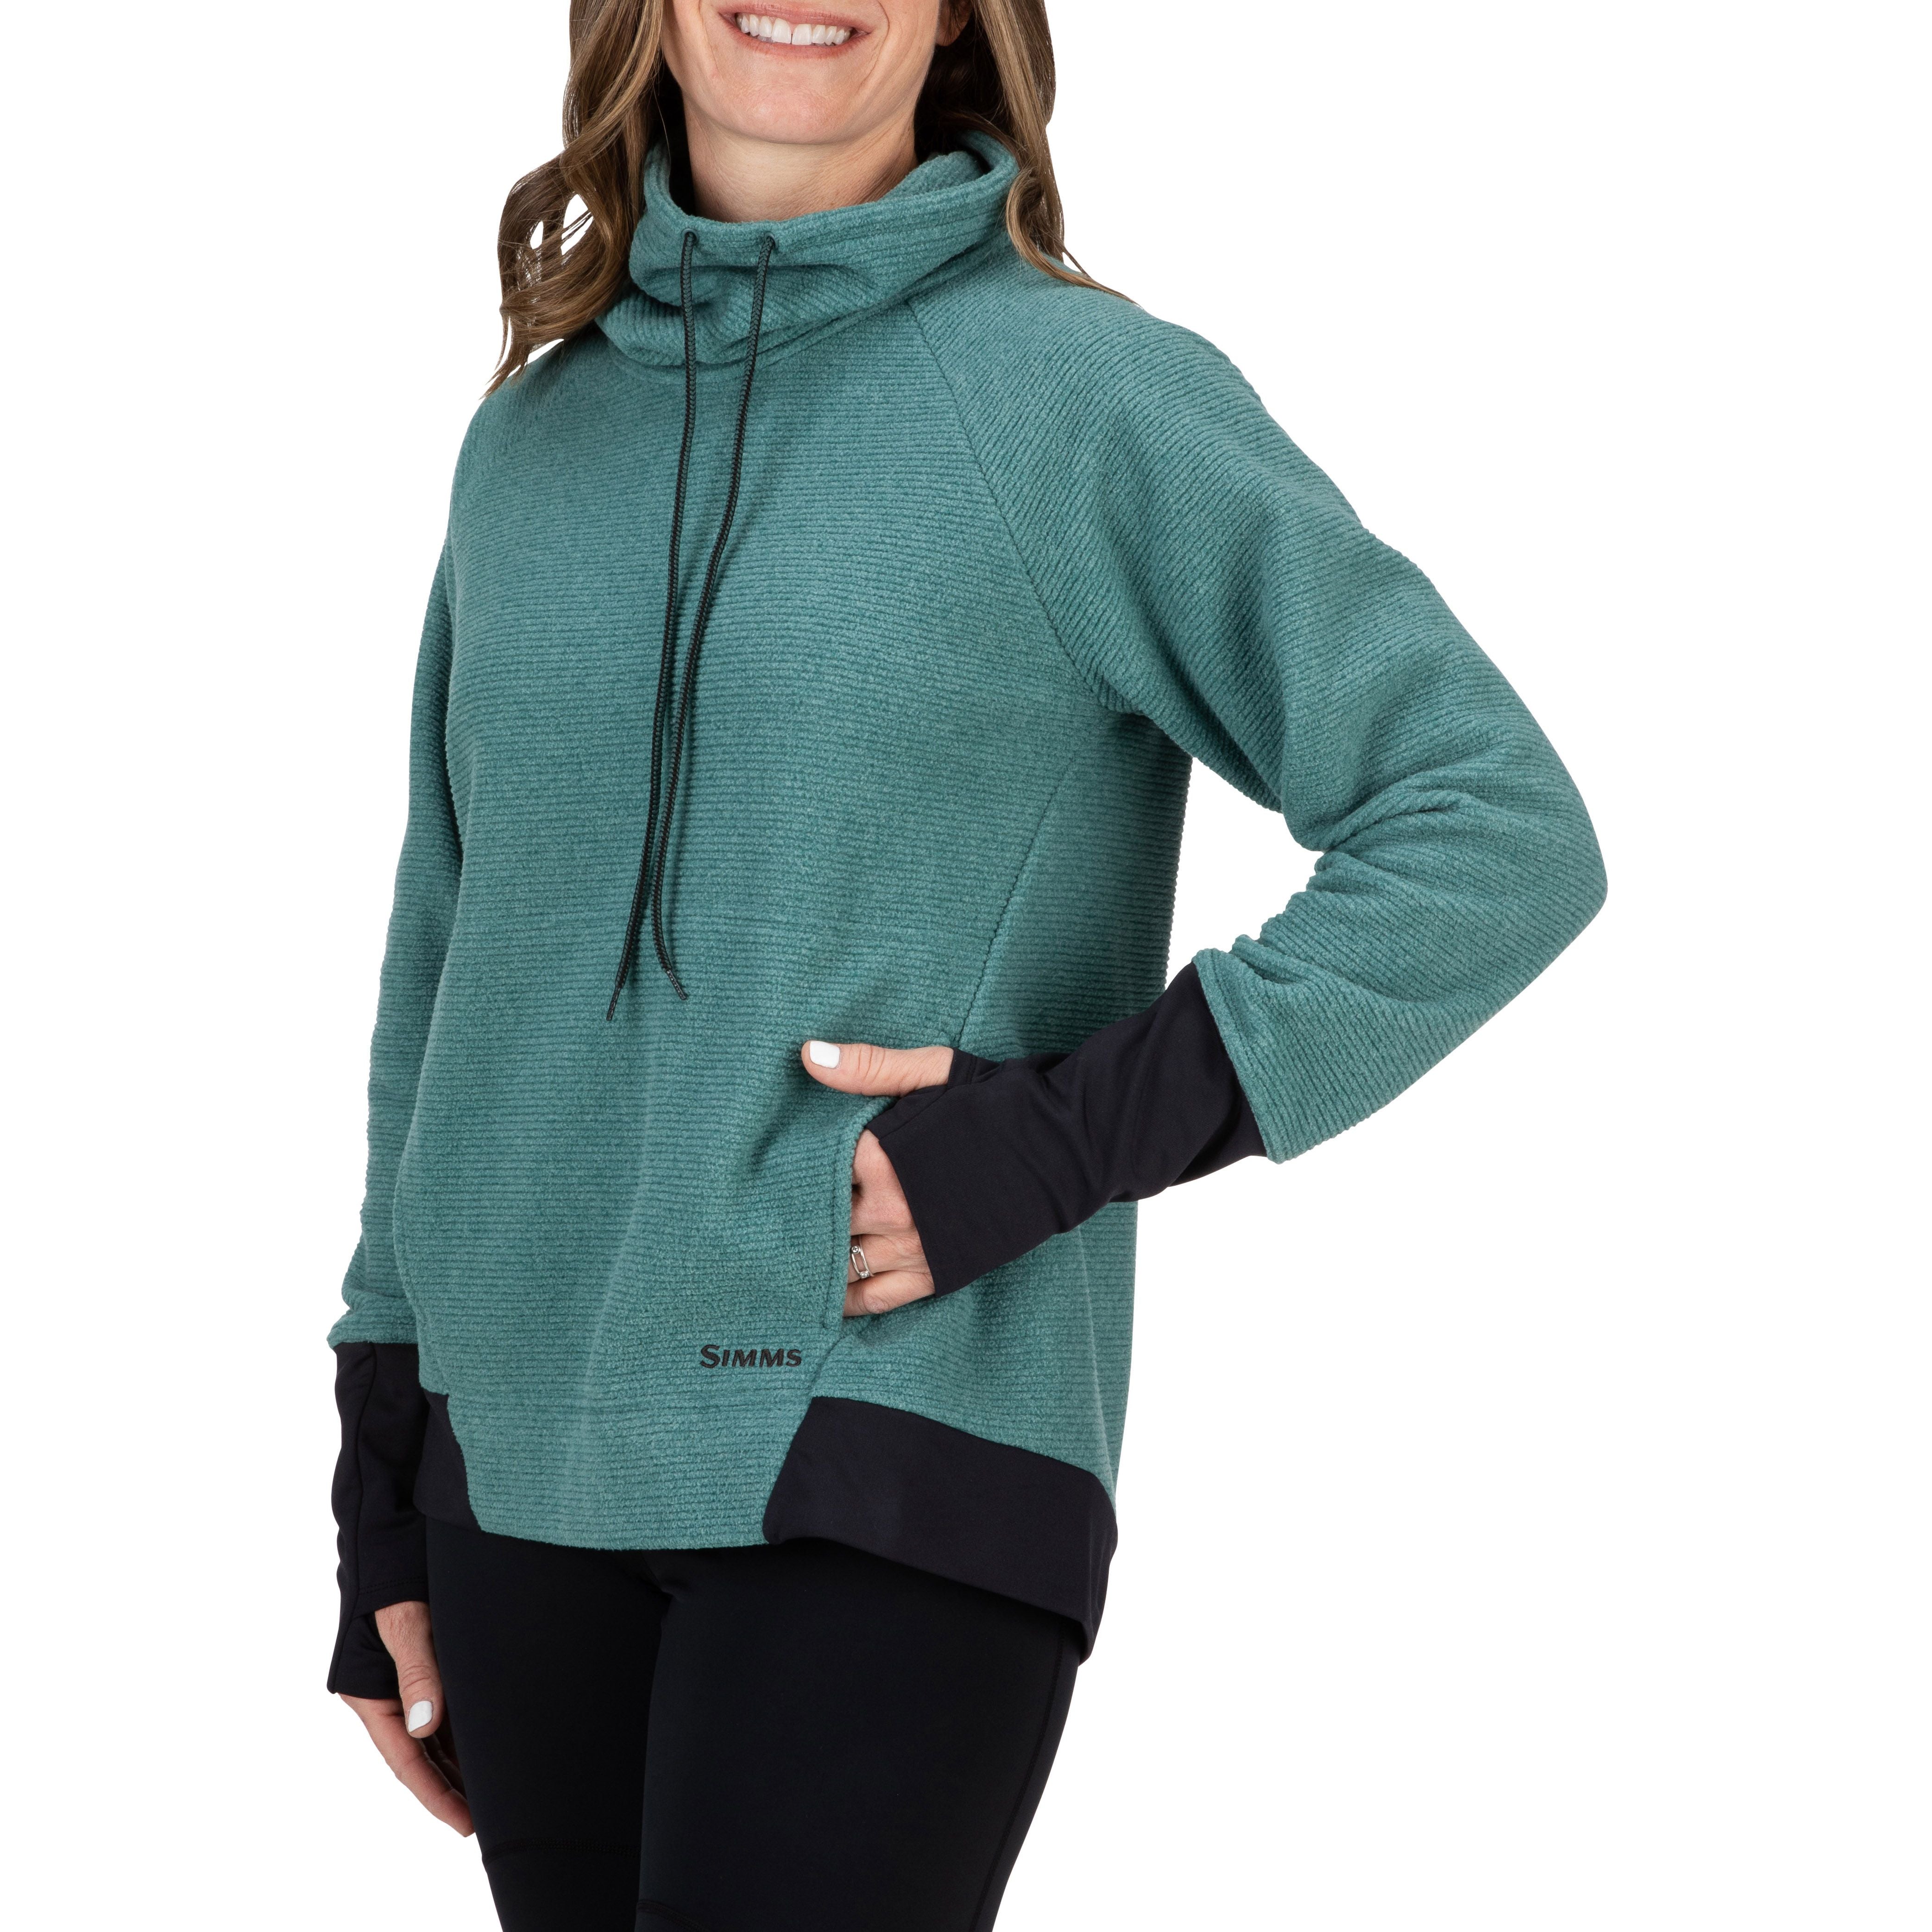 Simms Women's Rivershed Sweater Avalon Teal Image 04